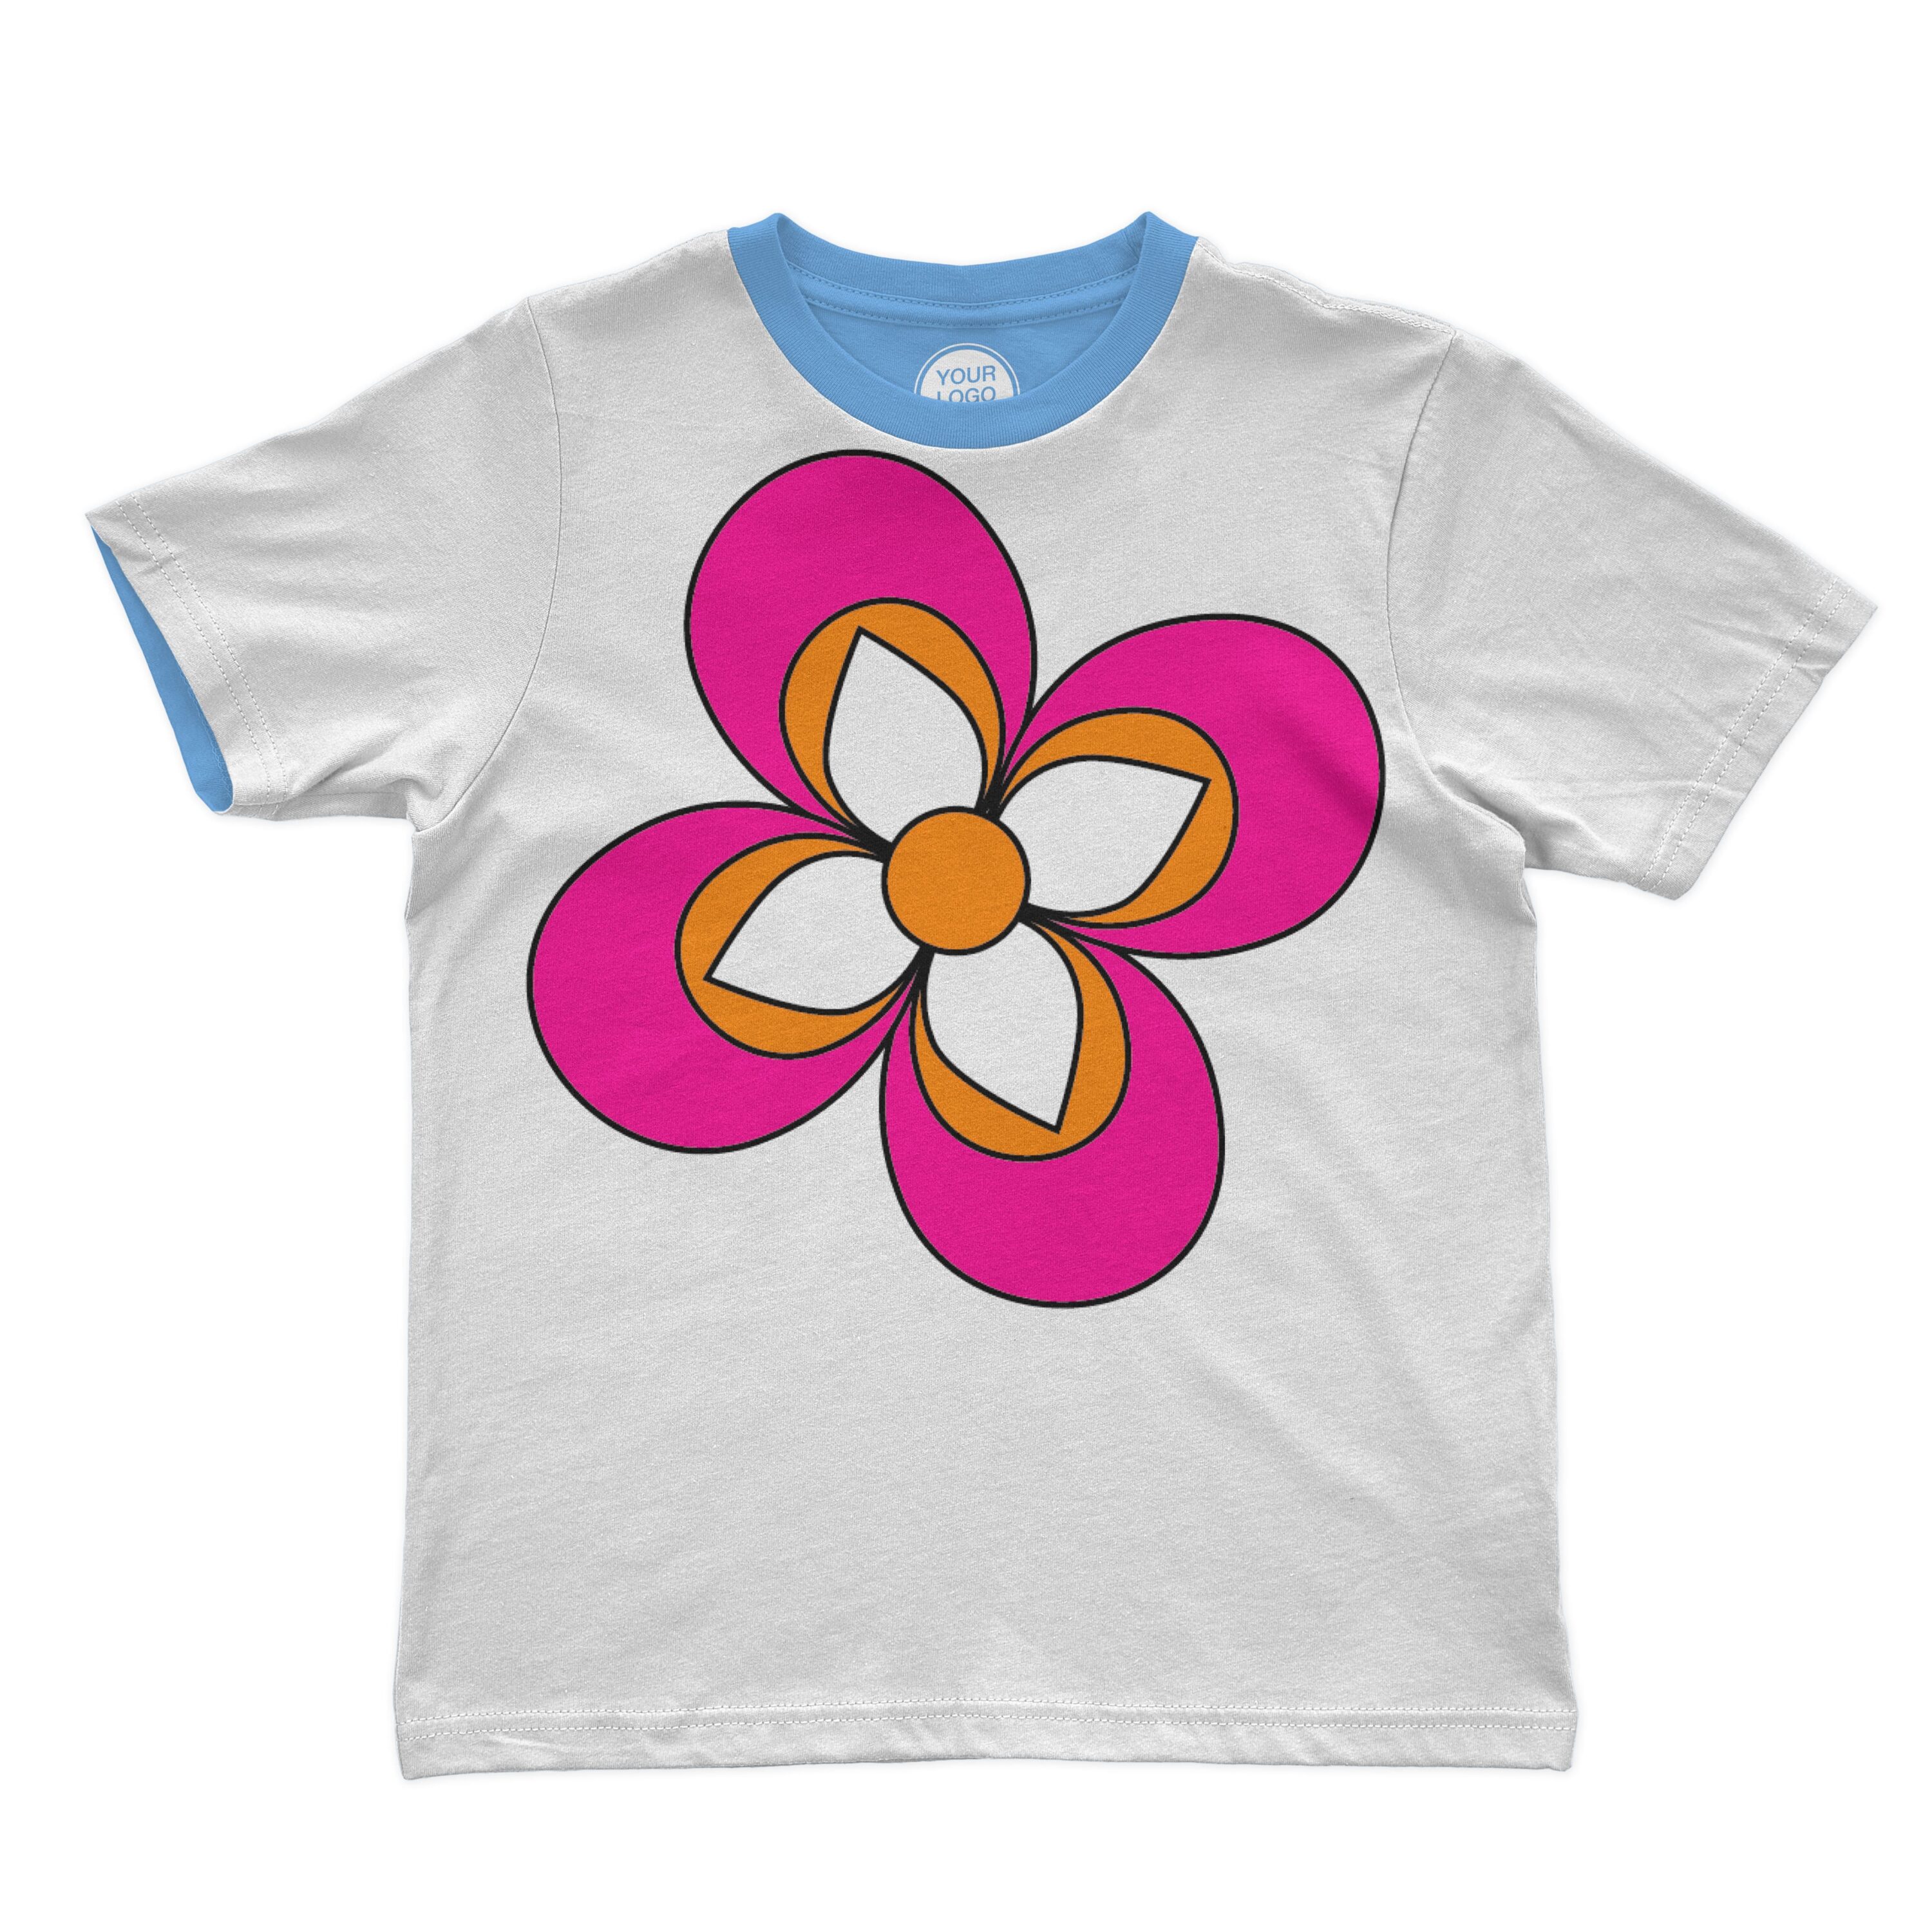 Cute pink flower on the white t-shirt design.